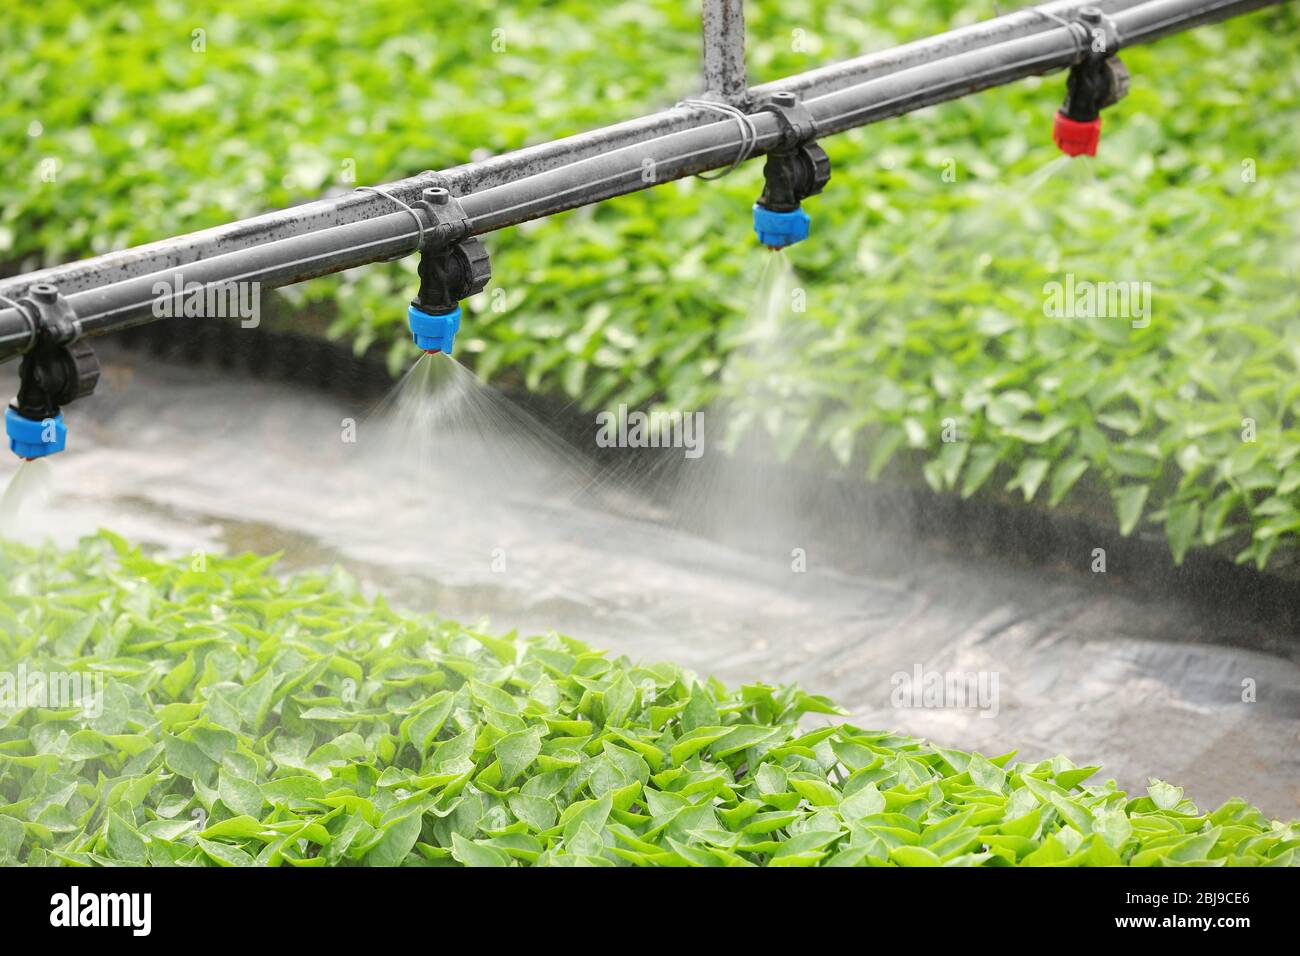 Greenhouse watering system in action Stock Photo